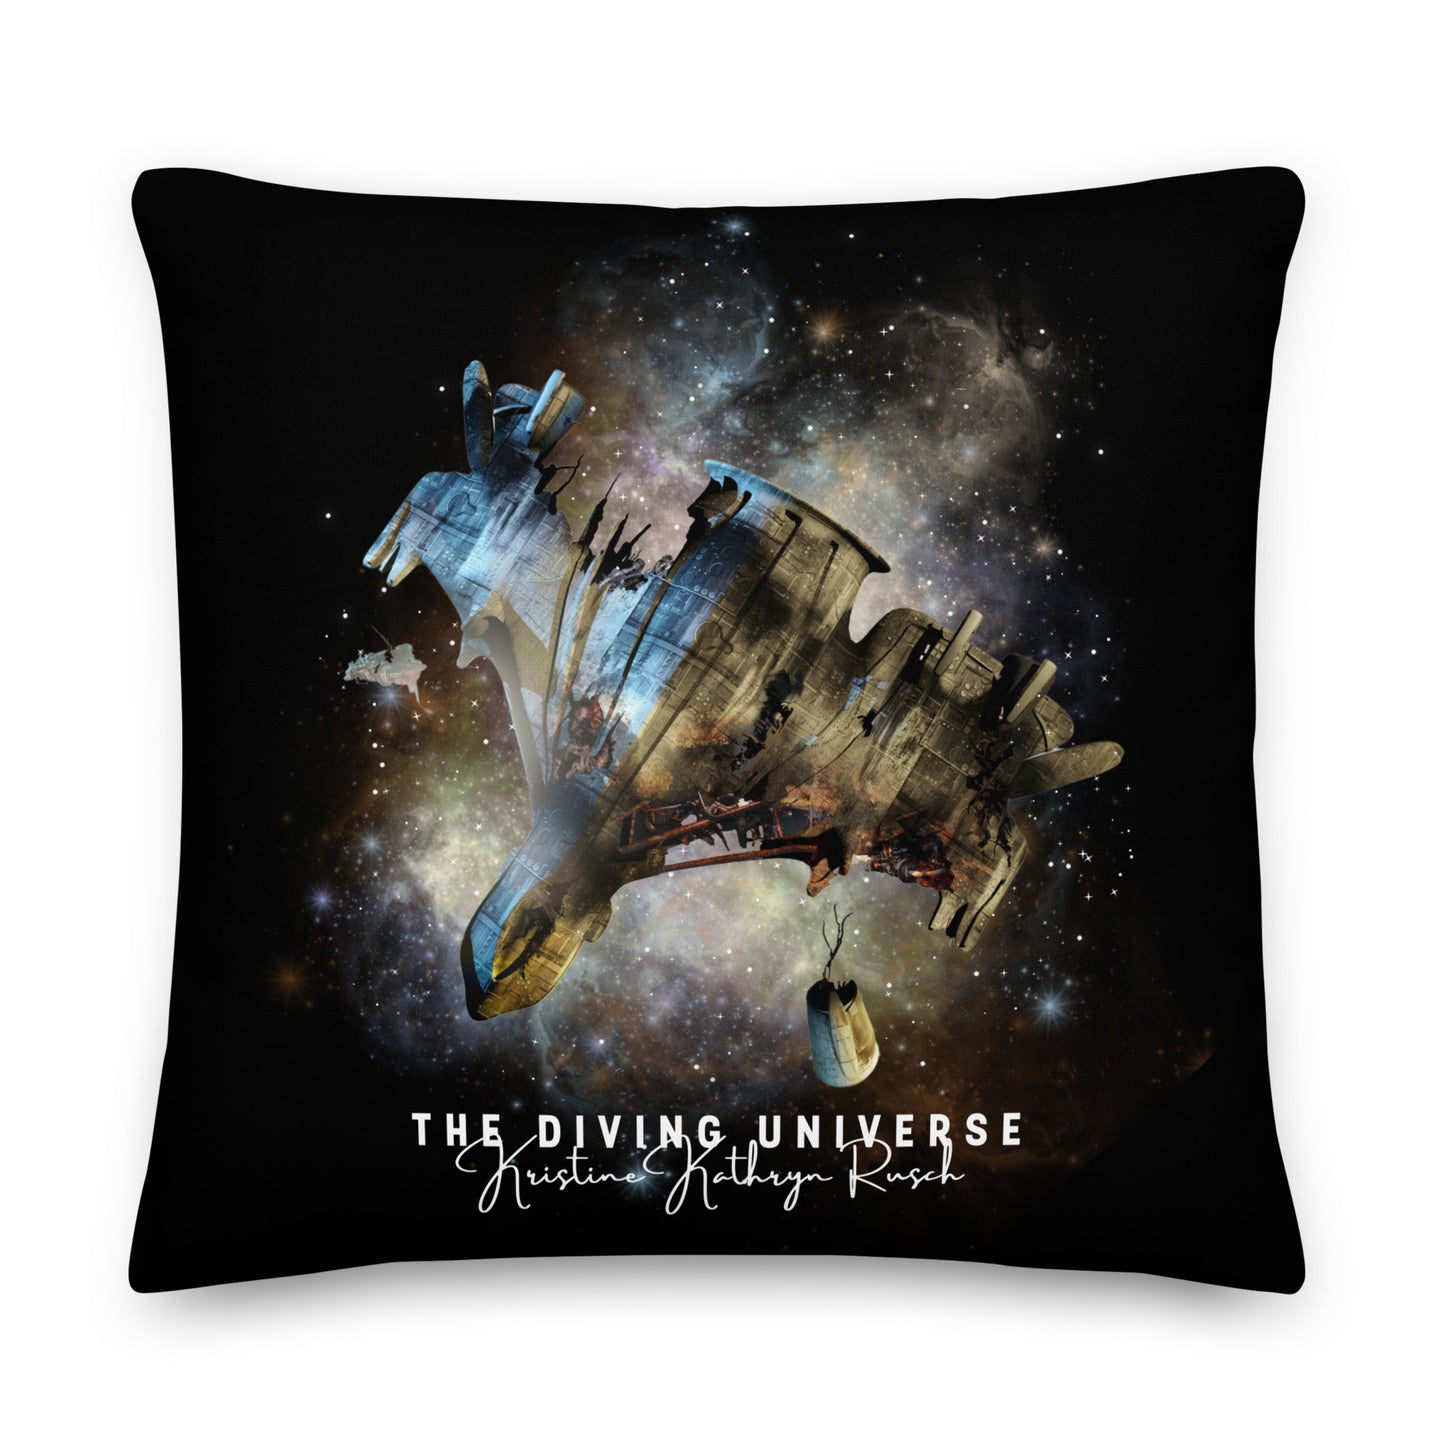 SPACESHIP WRECK Premium Pillow - The Diving Universe by Kristine Kathryn Rusch